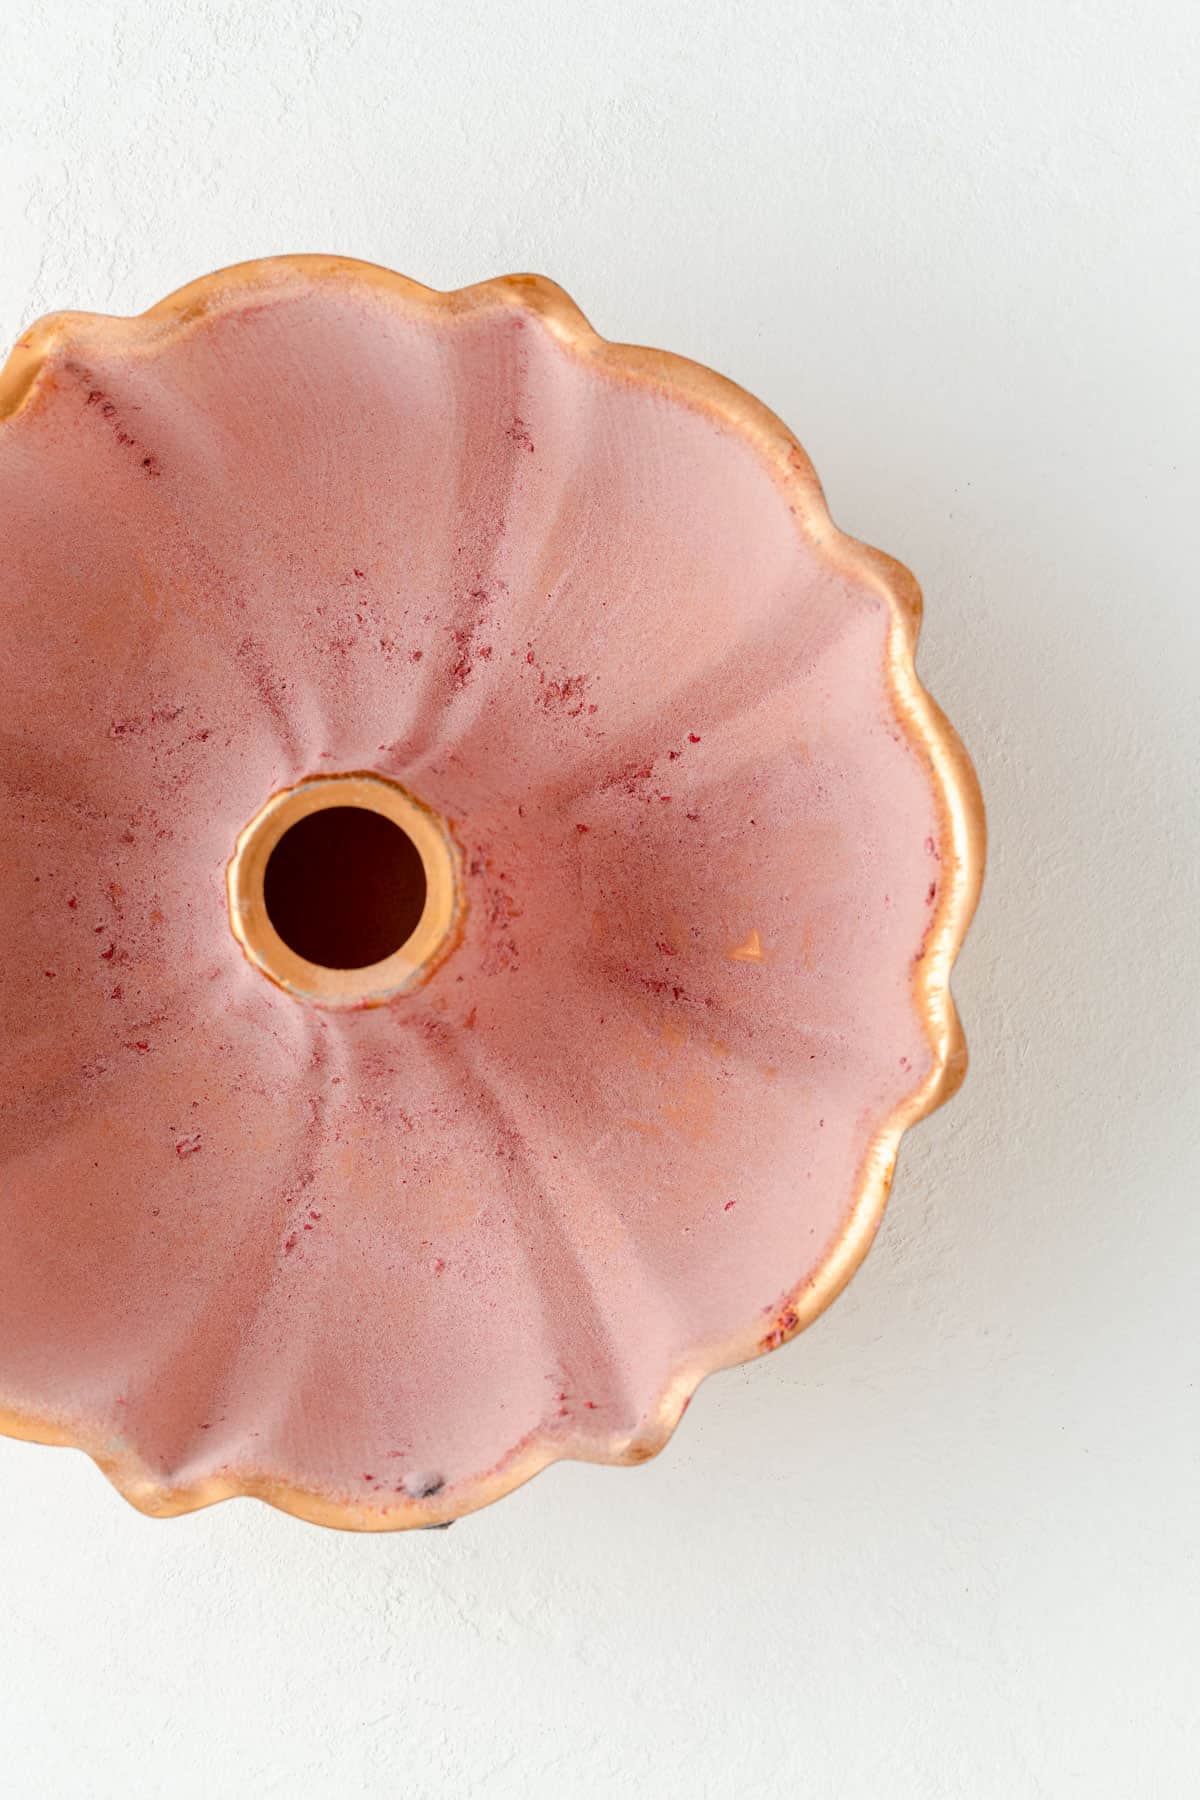 Raspberry flower dusted copper Bundt pan on a white background.